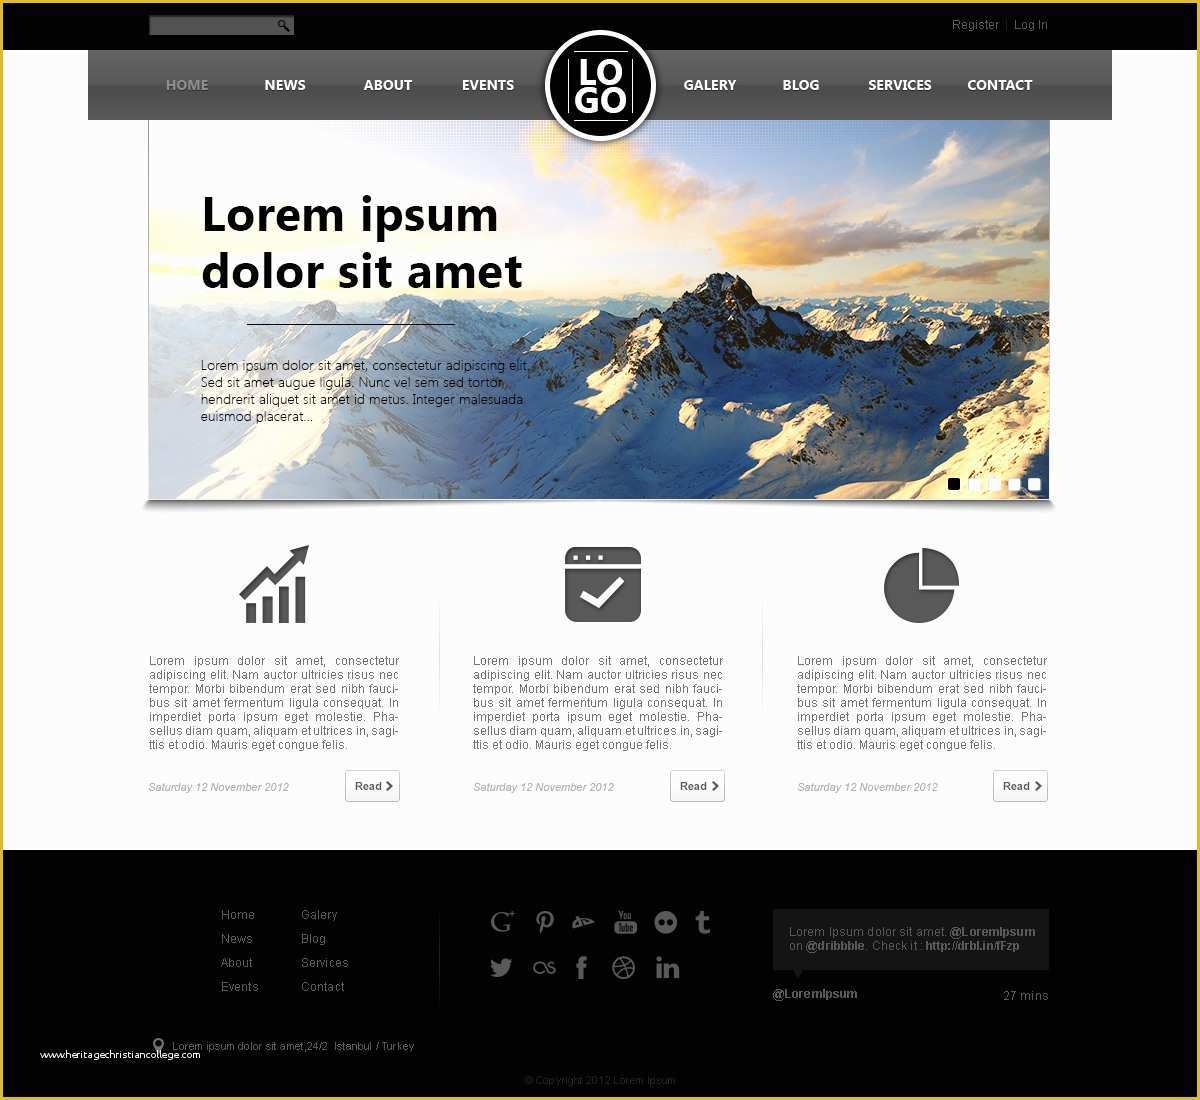 Free Website Templates Of Well Designed Psd Website Templates for Free Download